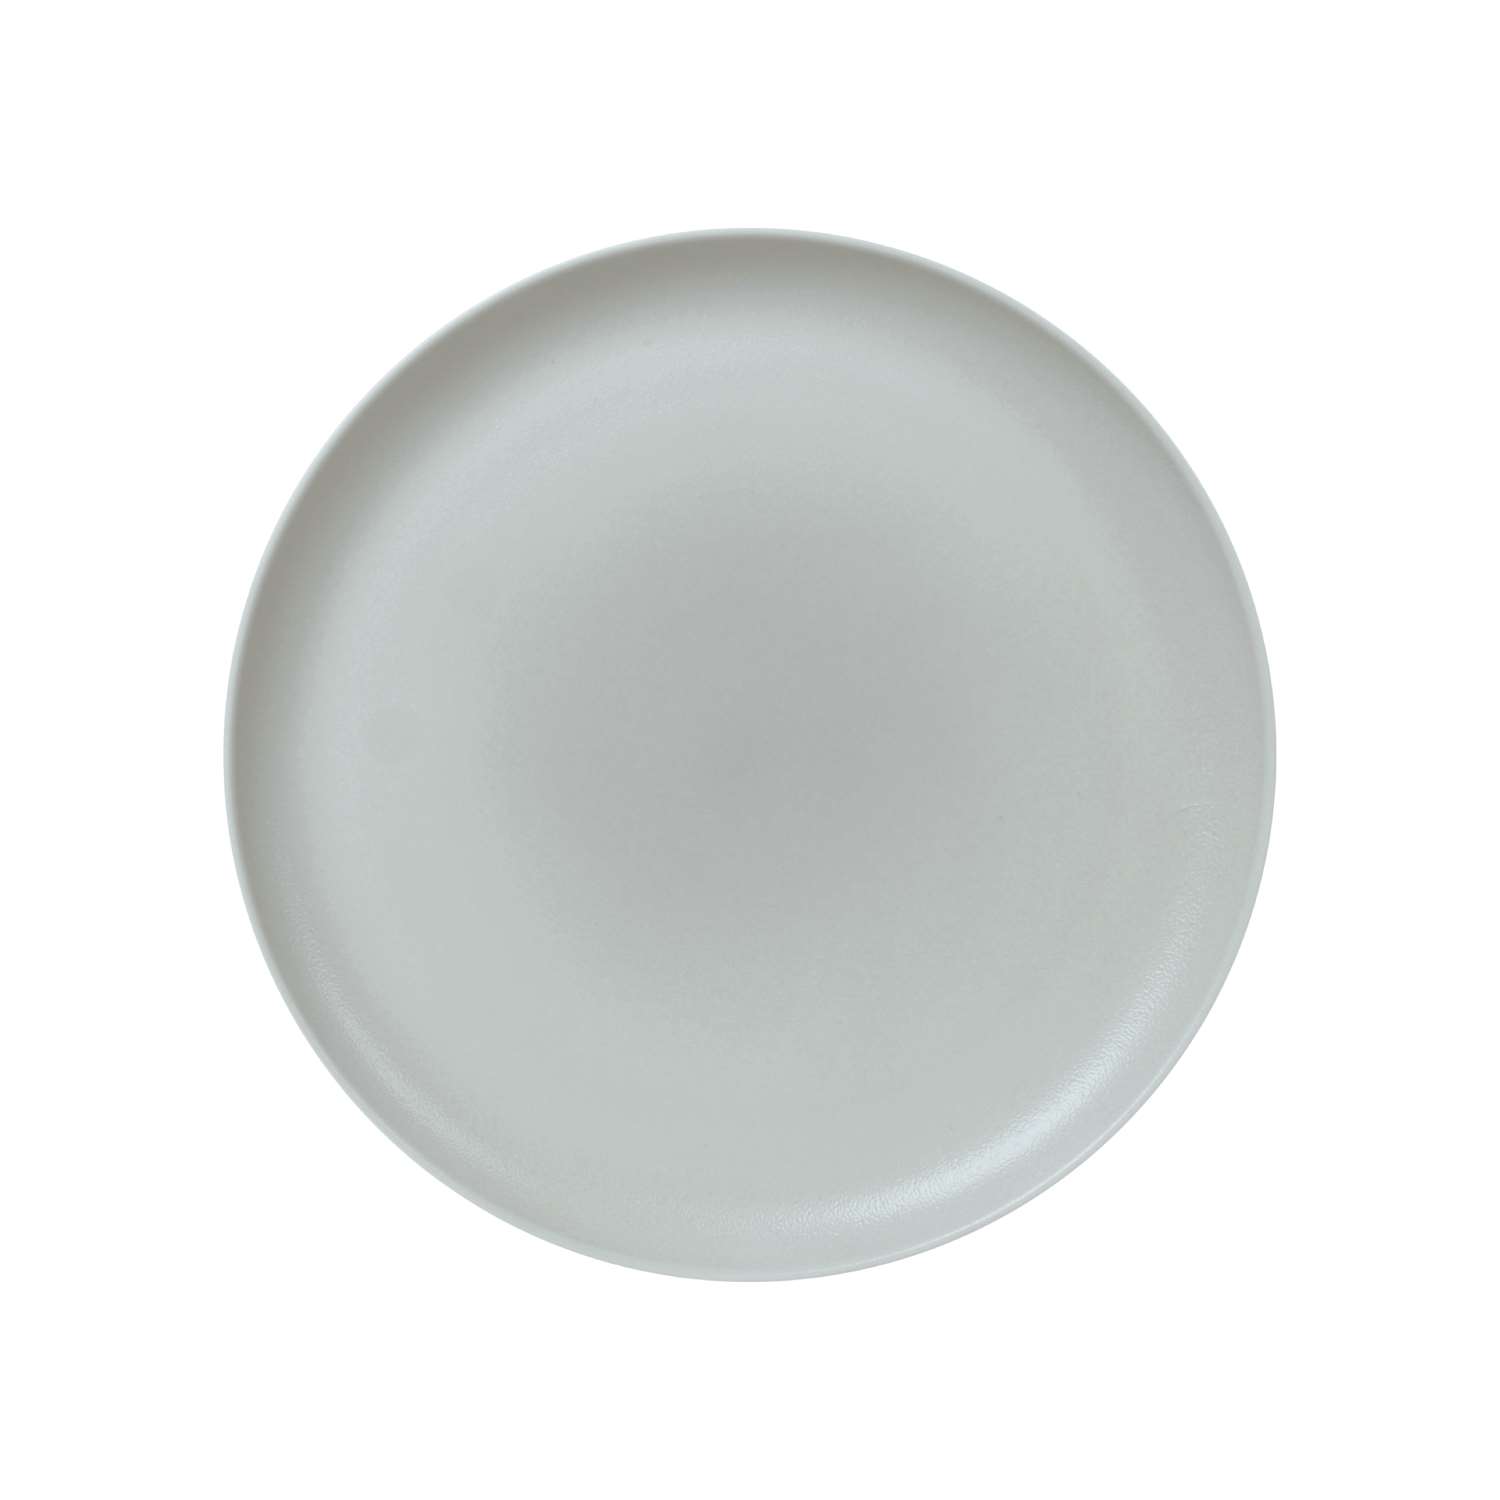 Baralee Light Grey Coupe Plate